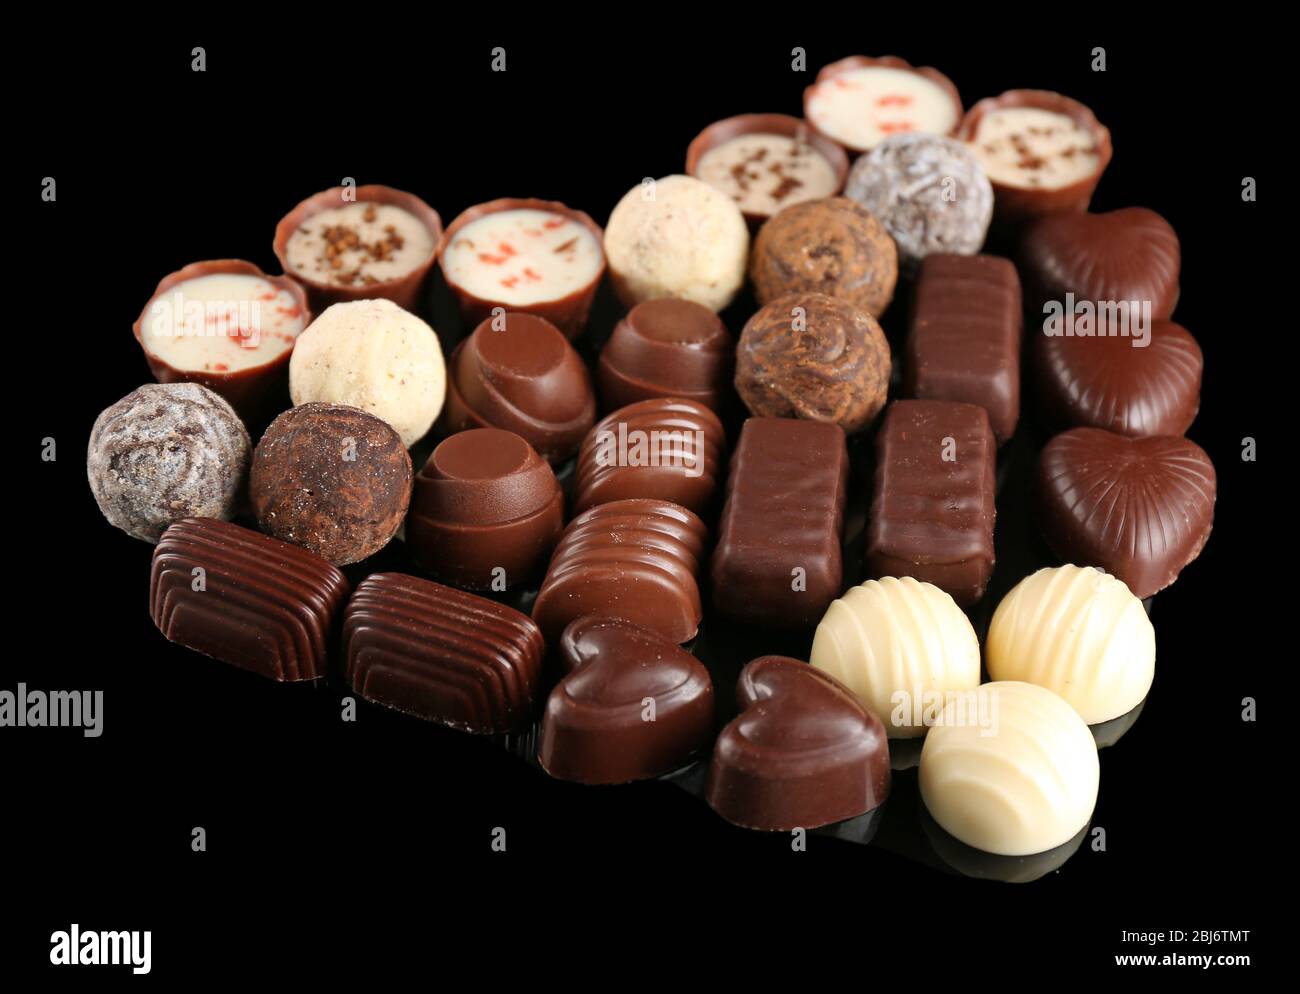 Assorted chocolate candies in form of heart on black background Stock Photo